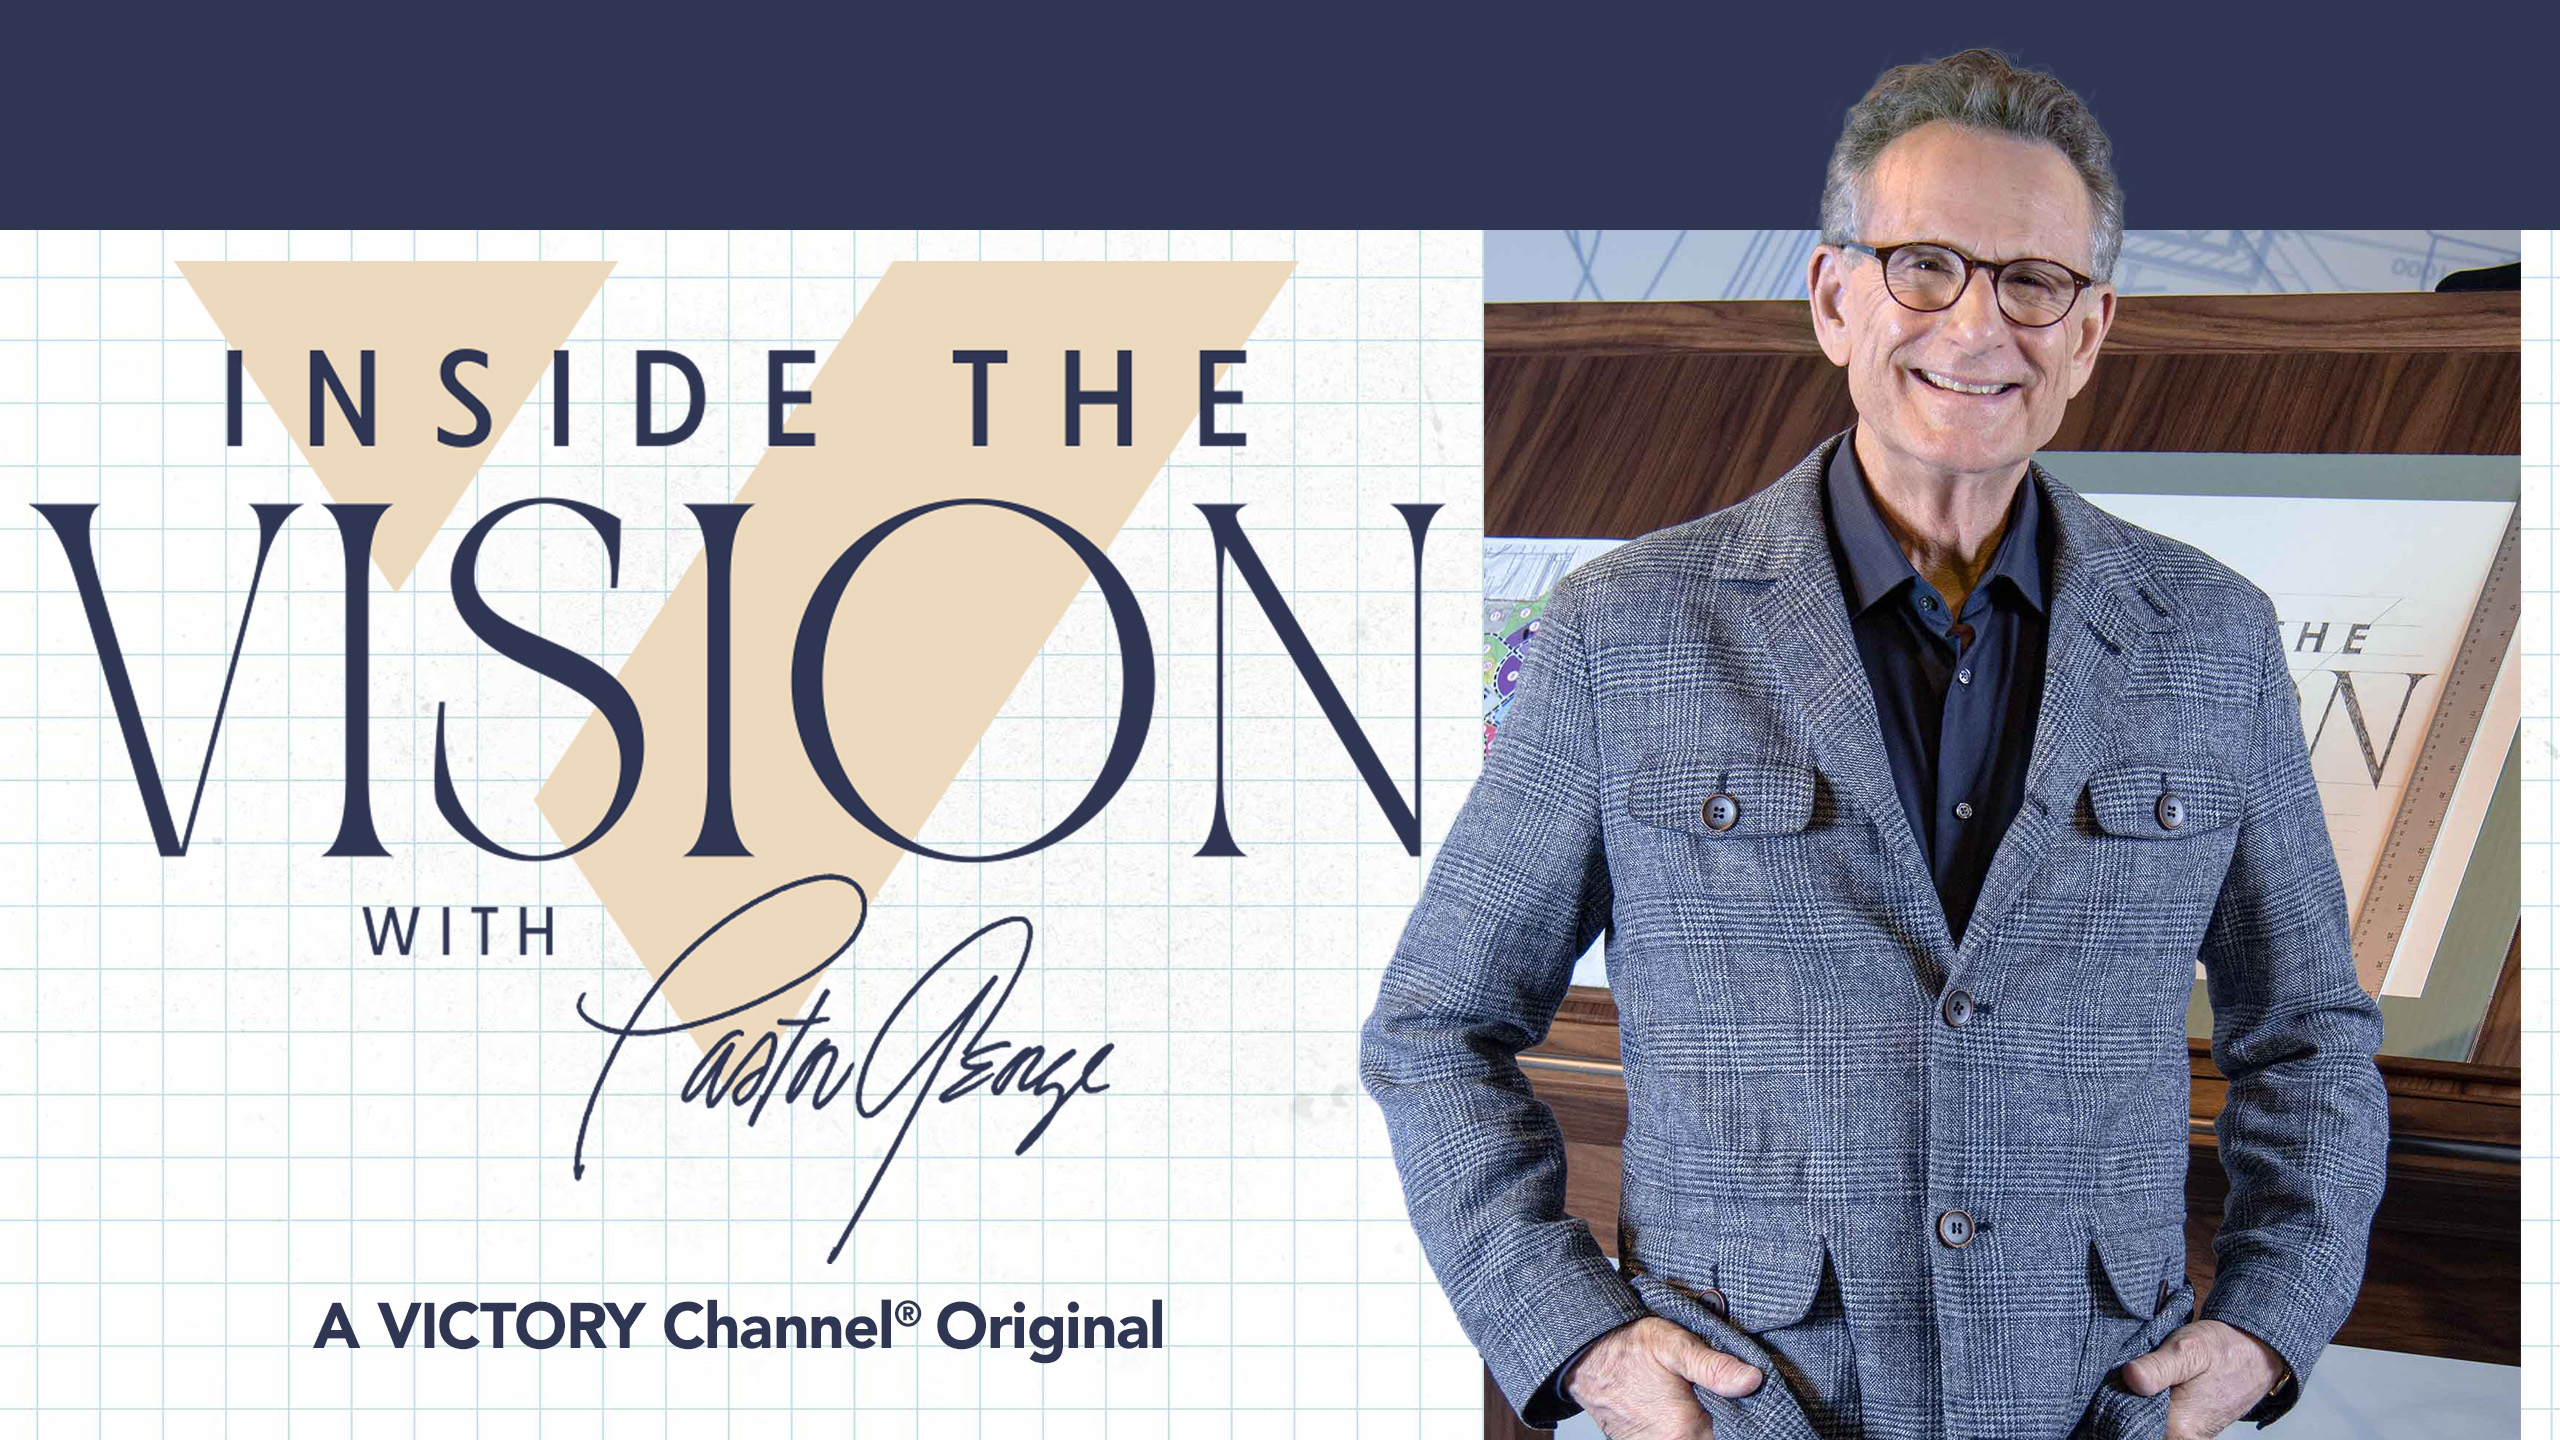 Inside The Vision - New KCM broadcast on the VICTORY Channel